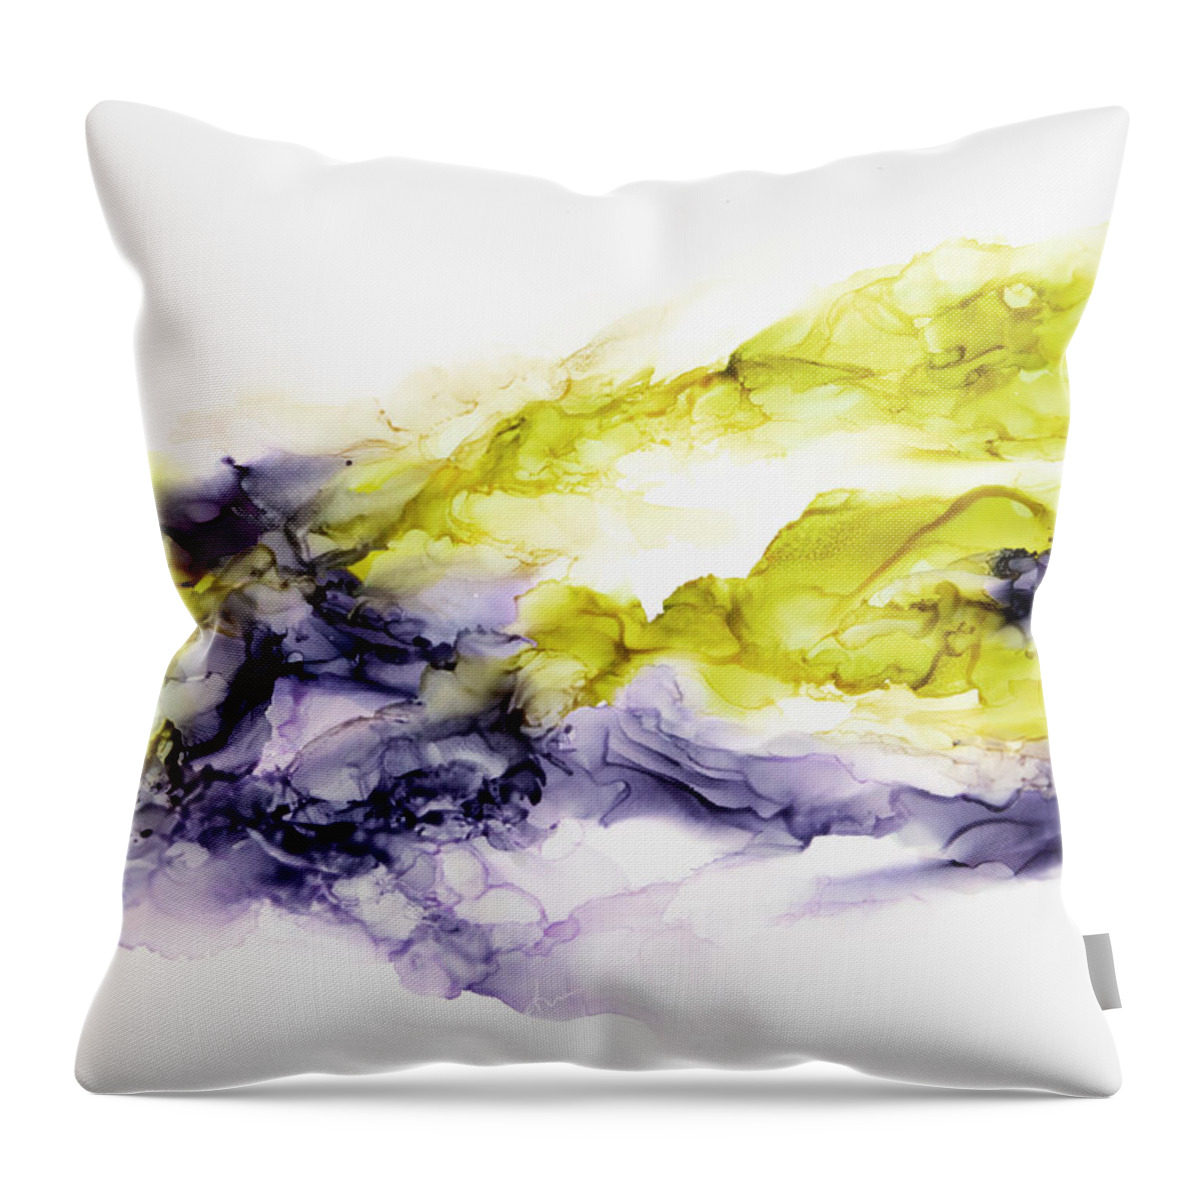  Throw Pillow featuring the painting Purple Yellow by Katrina Nixon